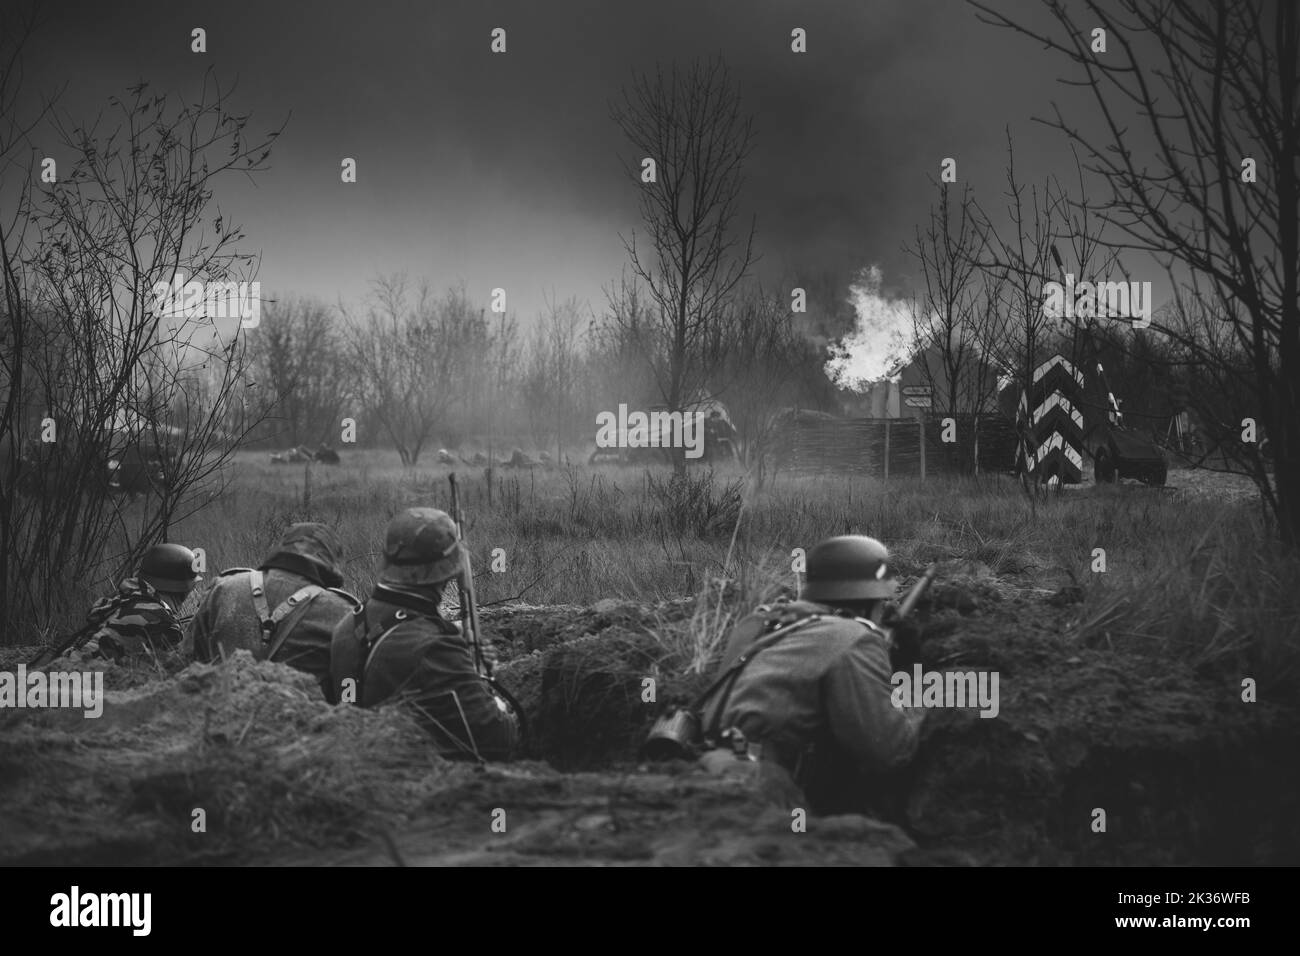 Re-enactors Dressed As World War Ii German Wehrmacht Infantry Soldiers Fighting Defensively in Trench. Defensive Position. Smokescreen. building on Stock Photo